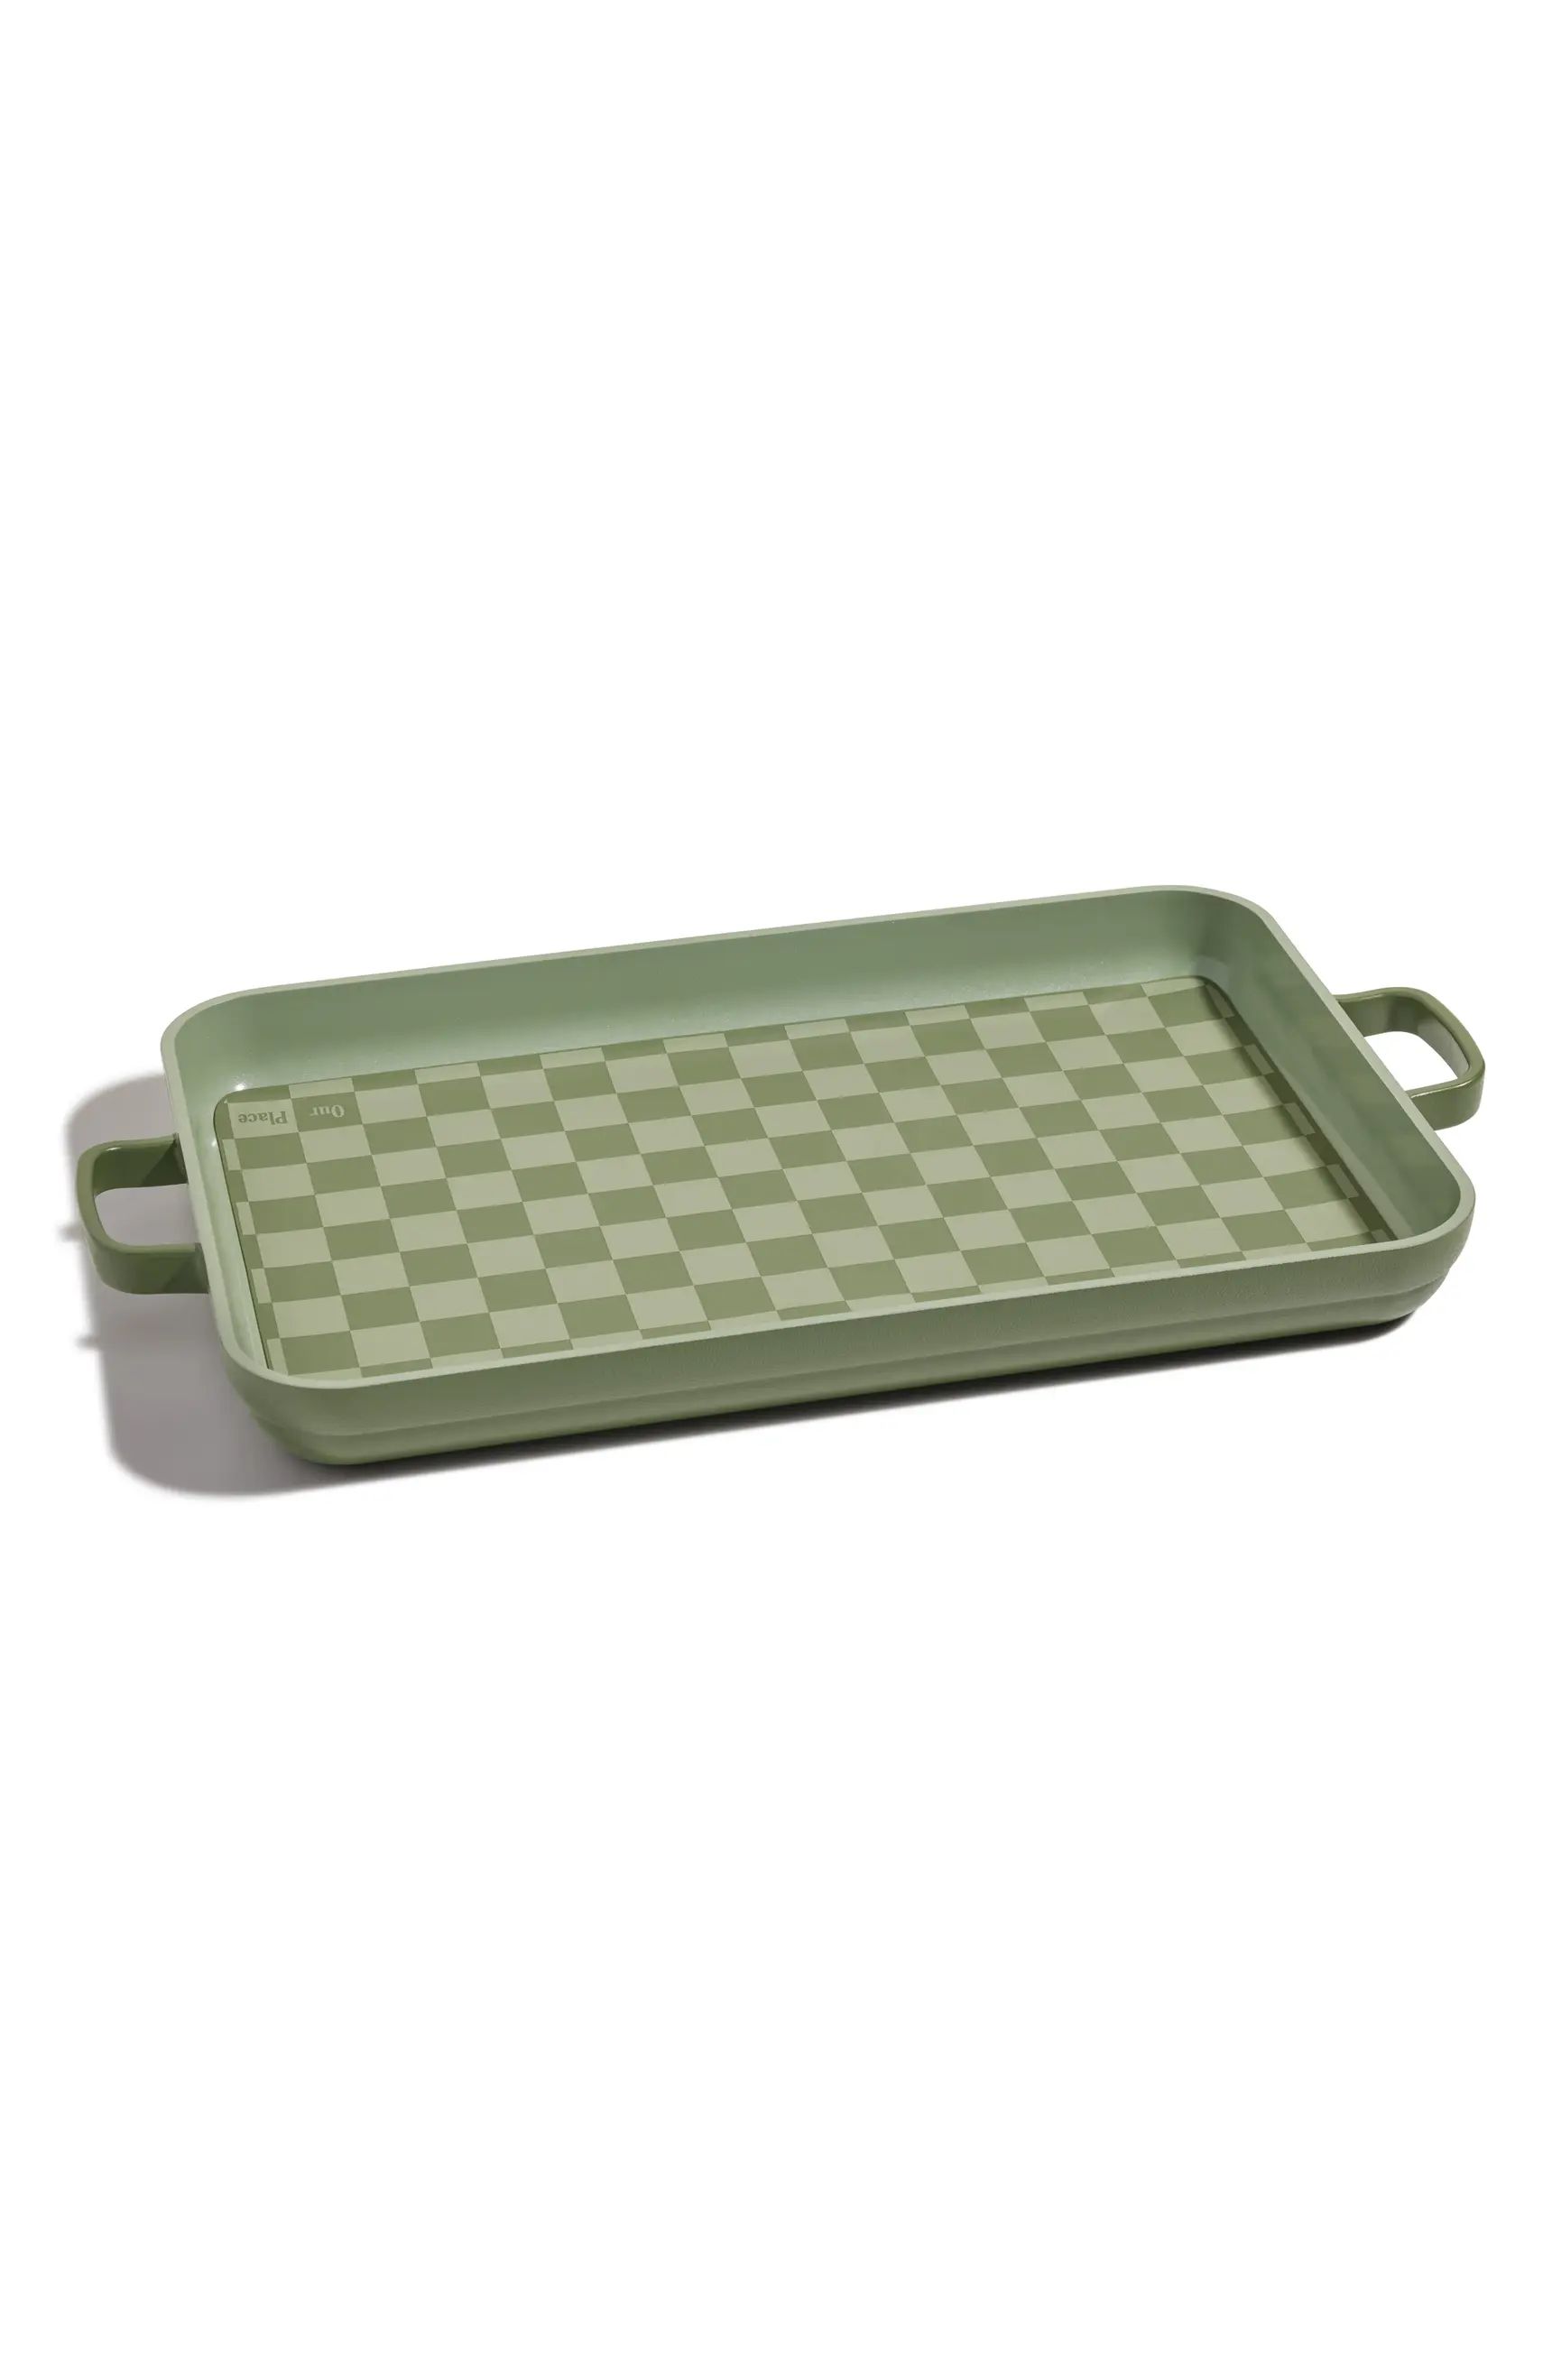 Oven Pan and Mat | Nordstrom